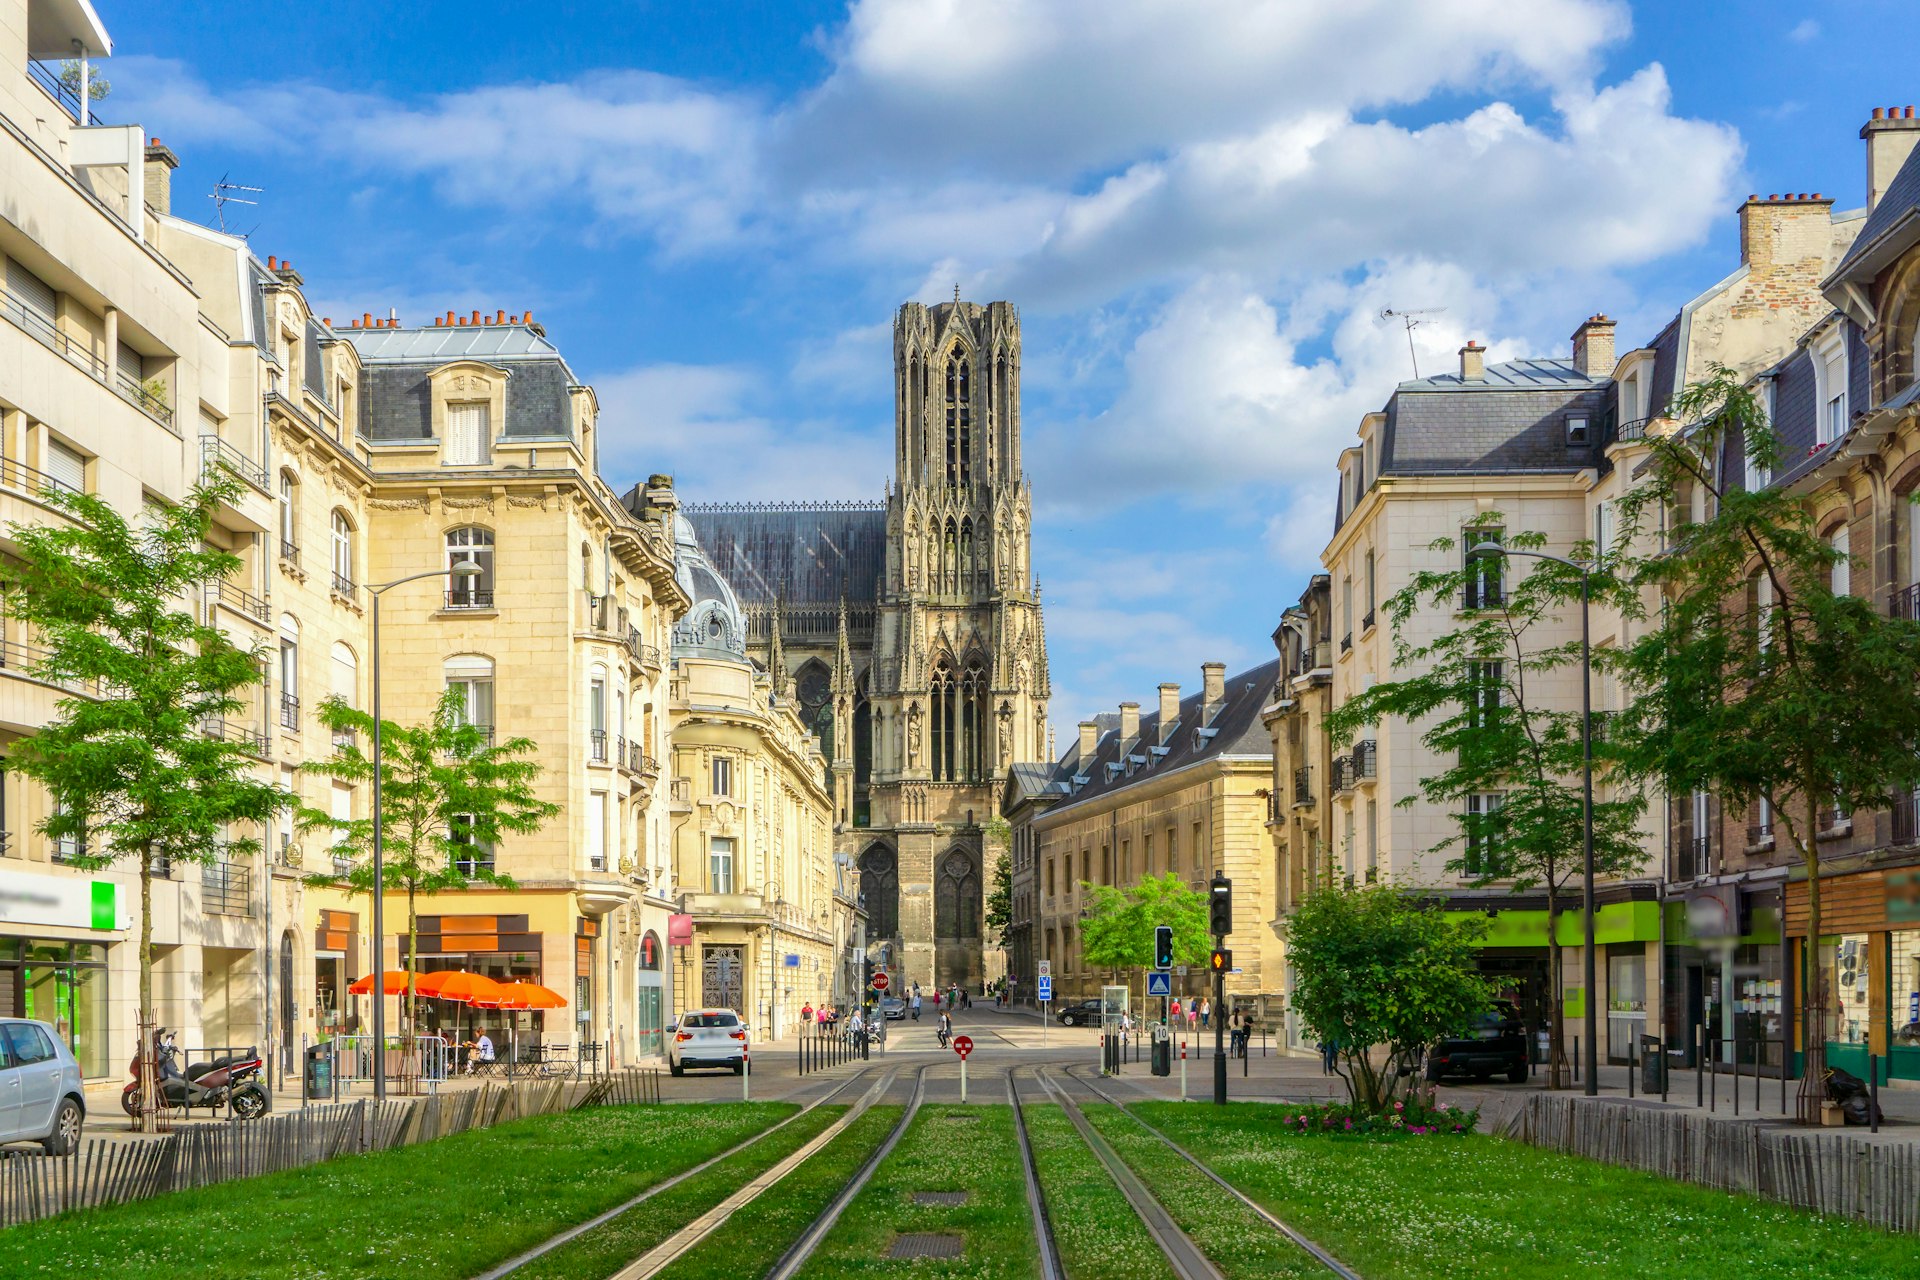 A city street lined with old buildings leading to Reims Cathedral, with green grass in the foreground